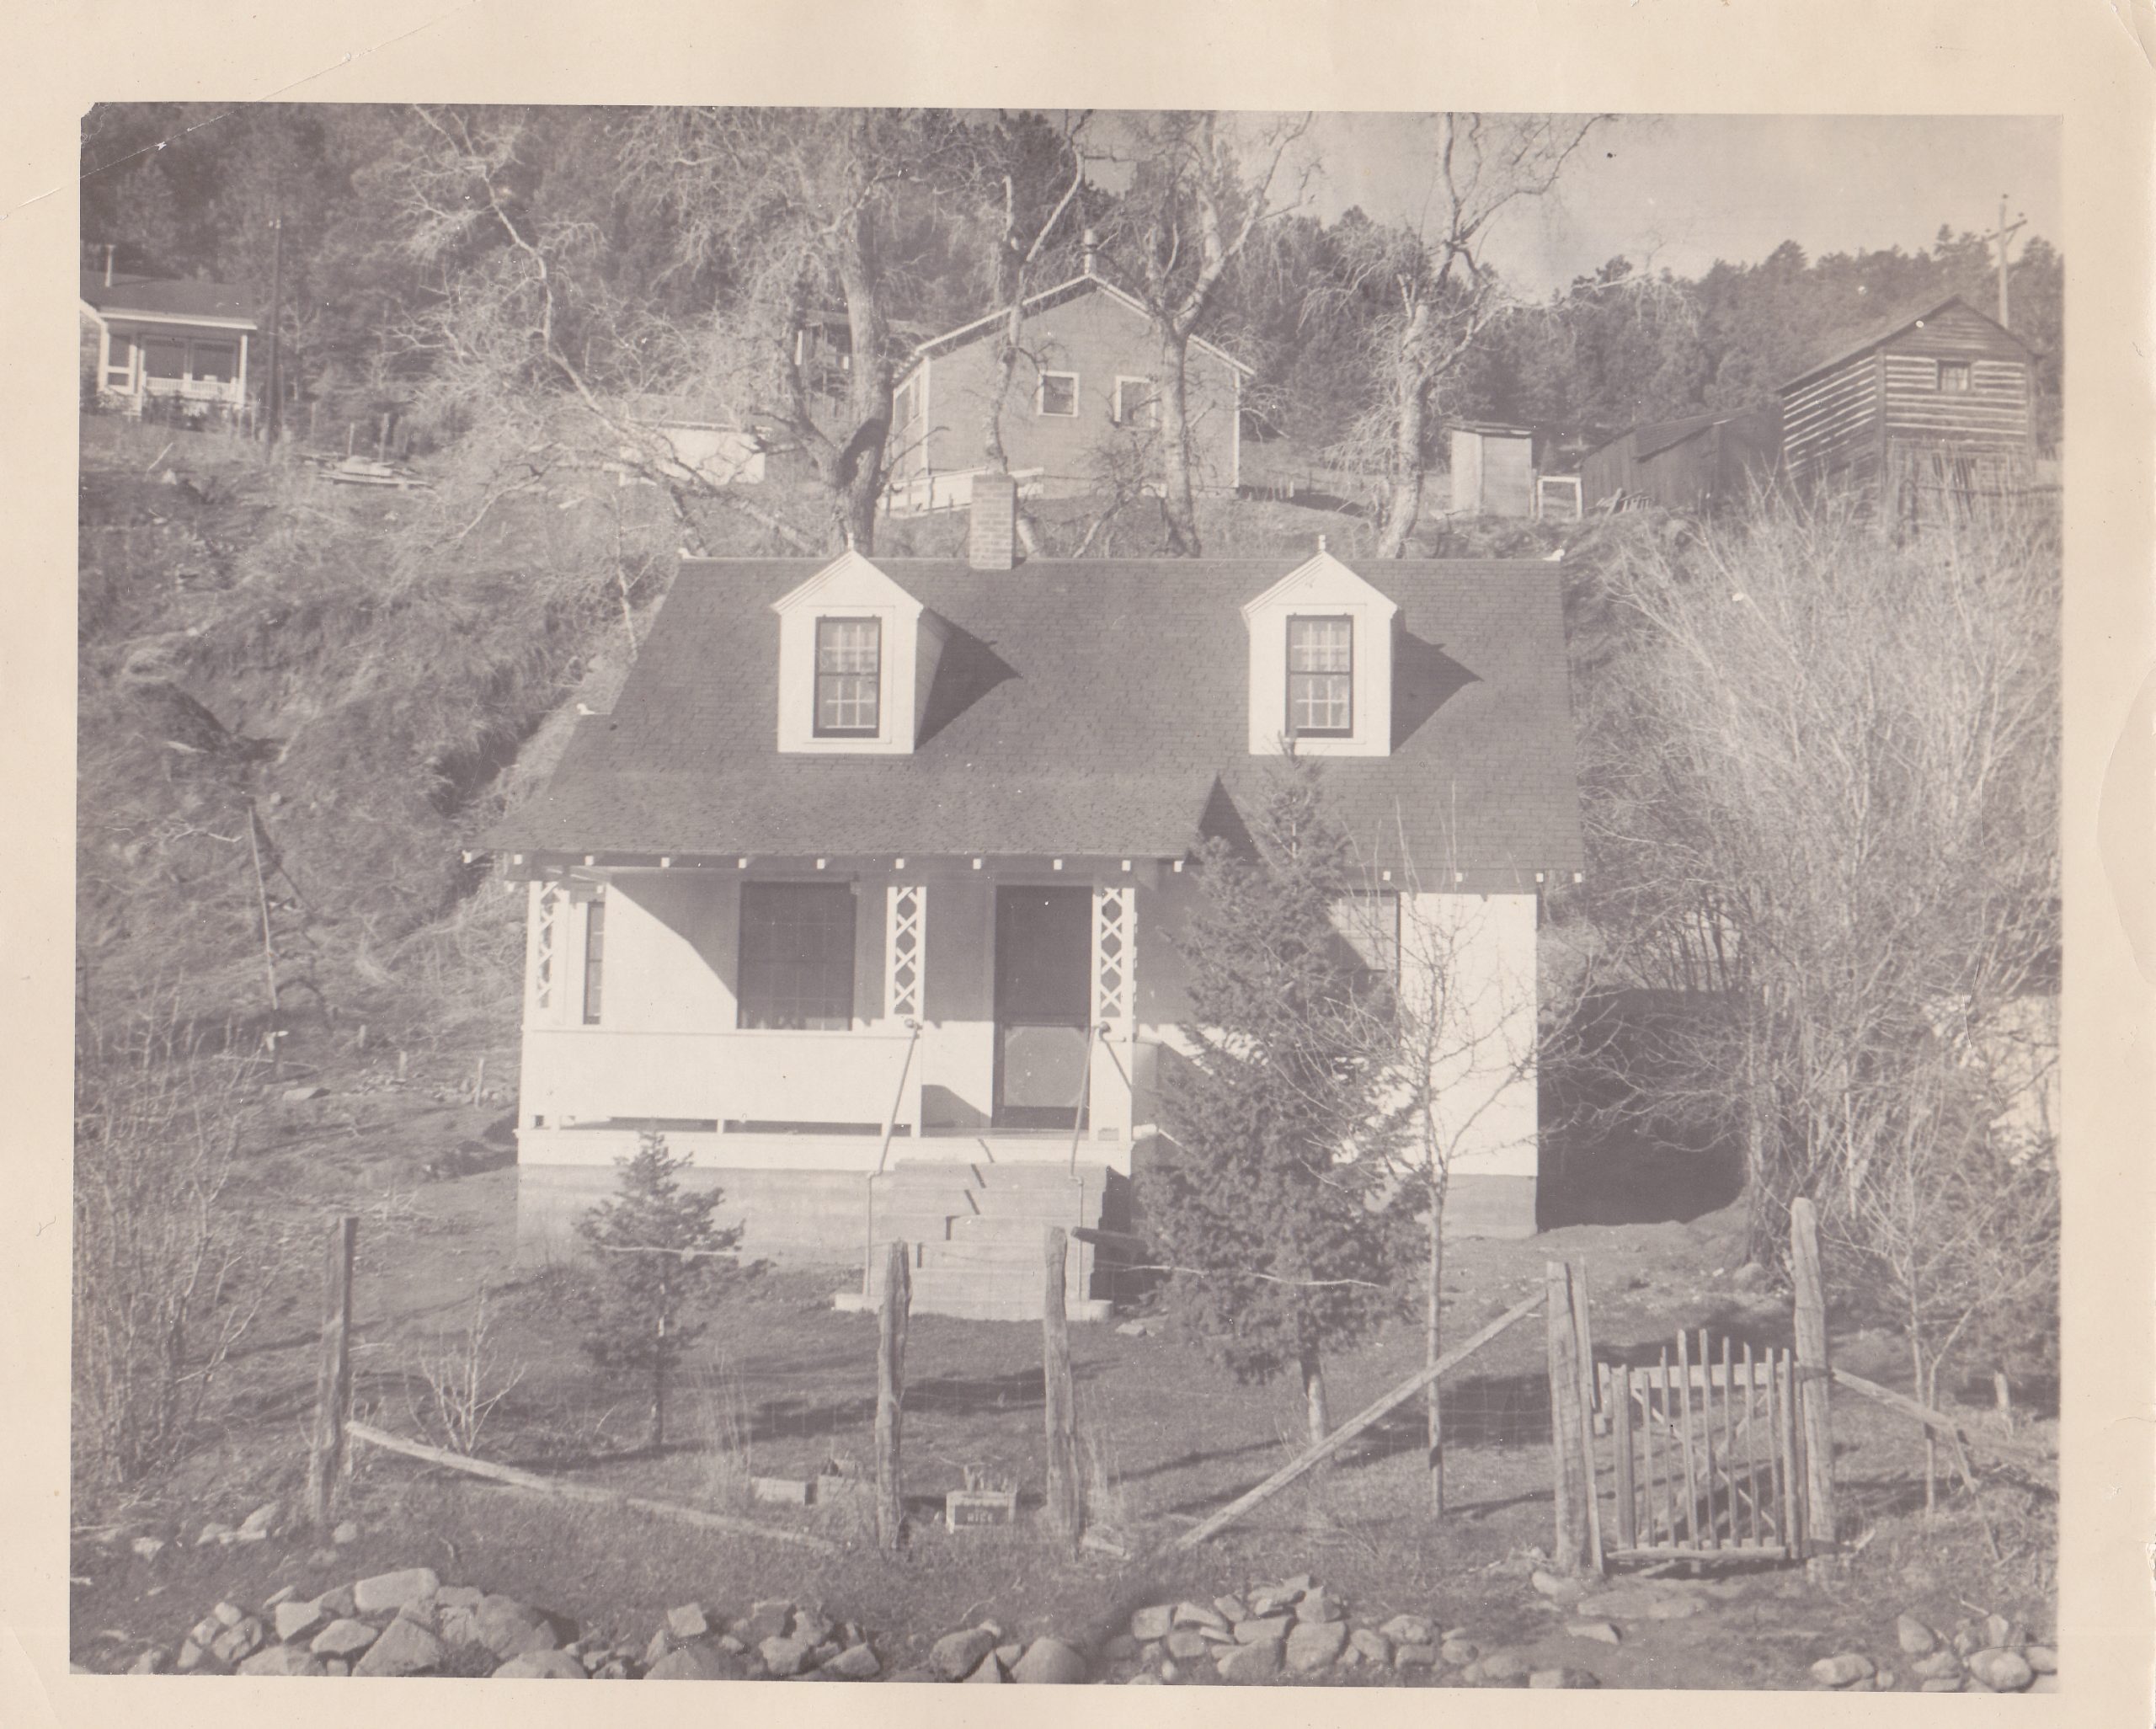 A Difficult Beginning: Researching the Mountain House